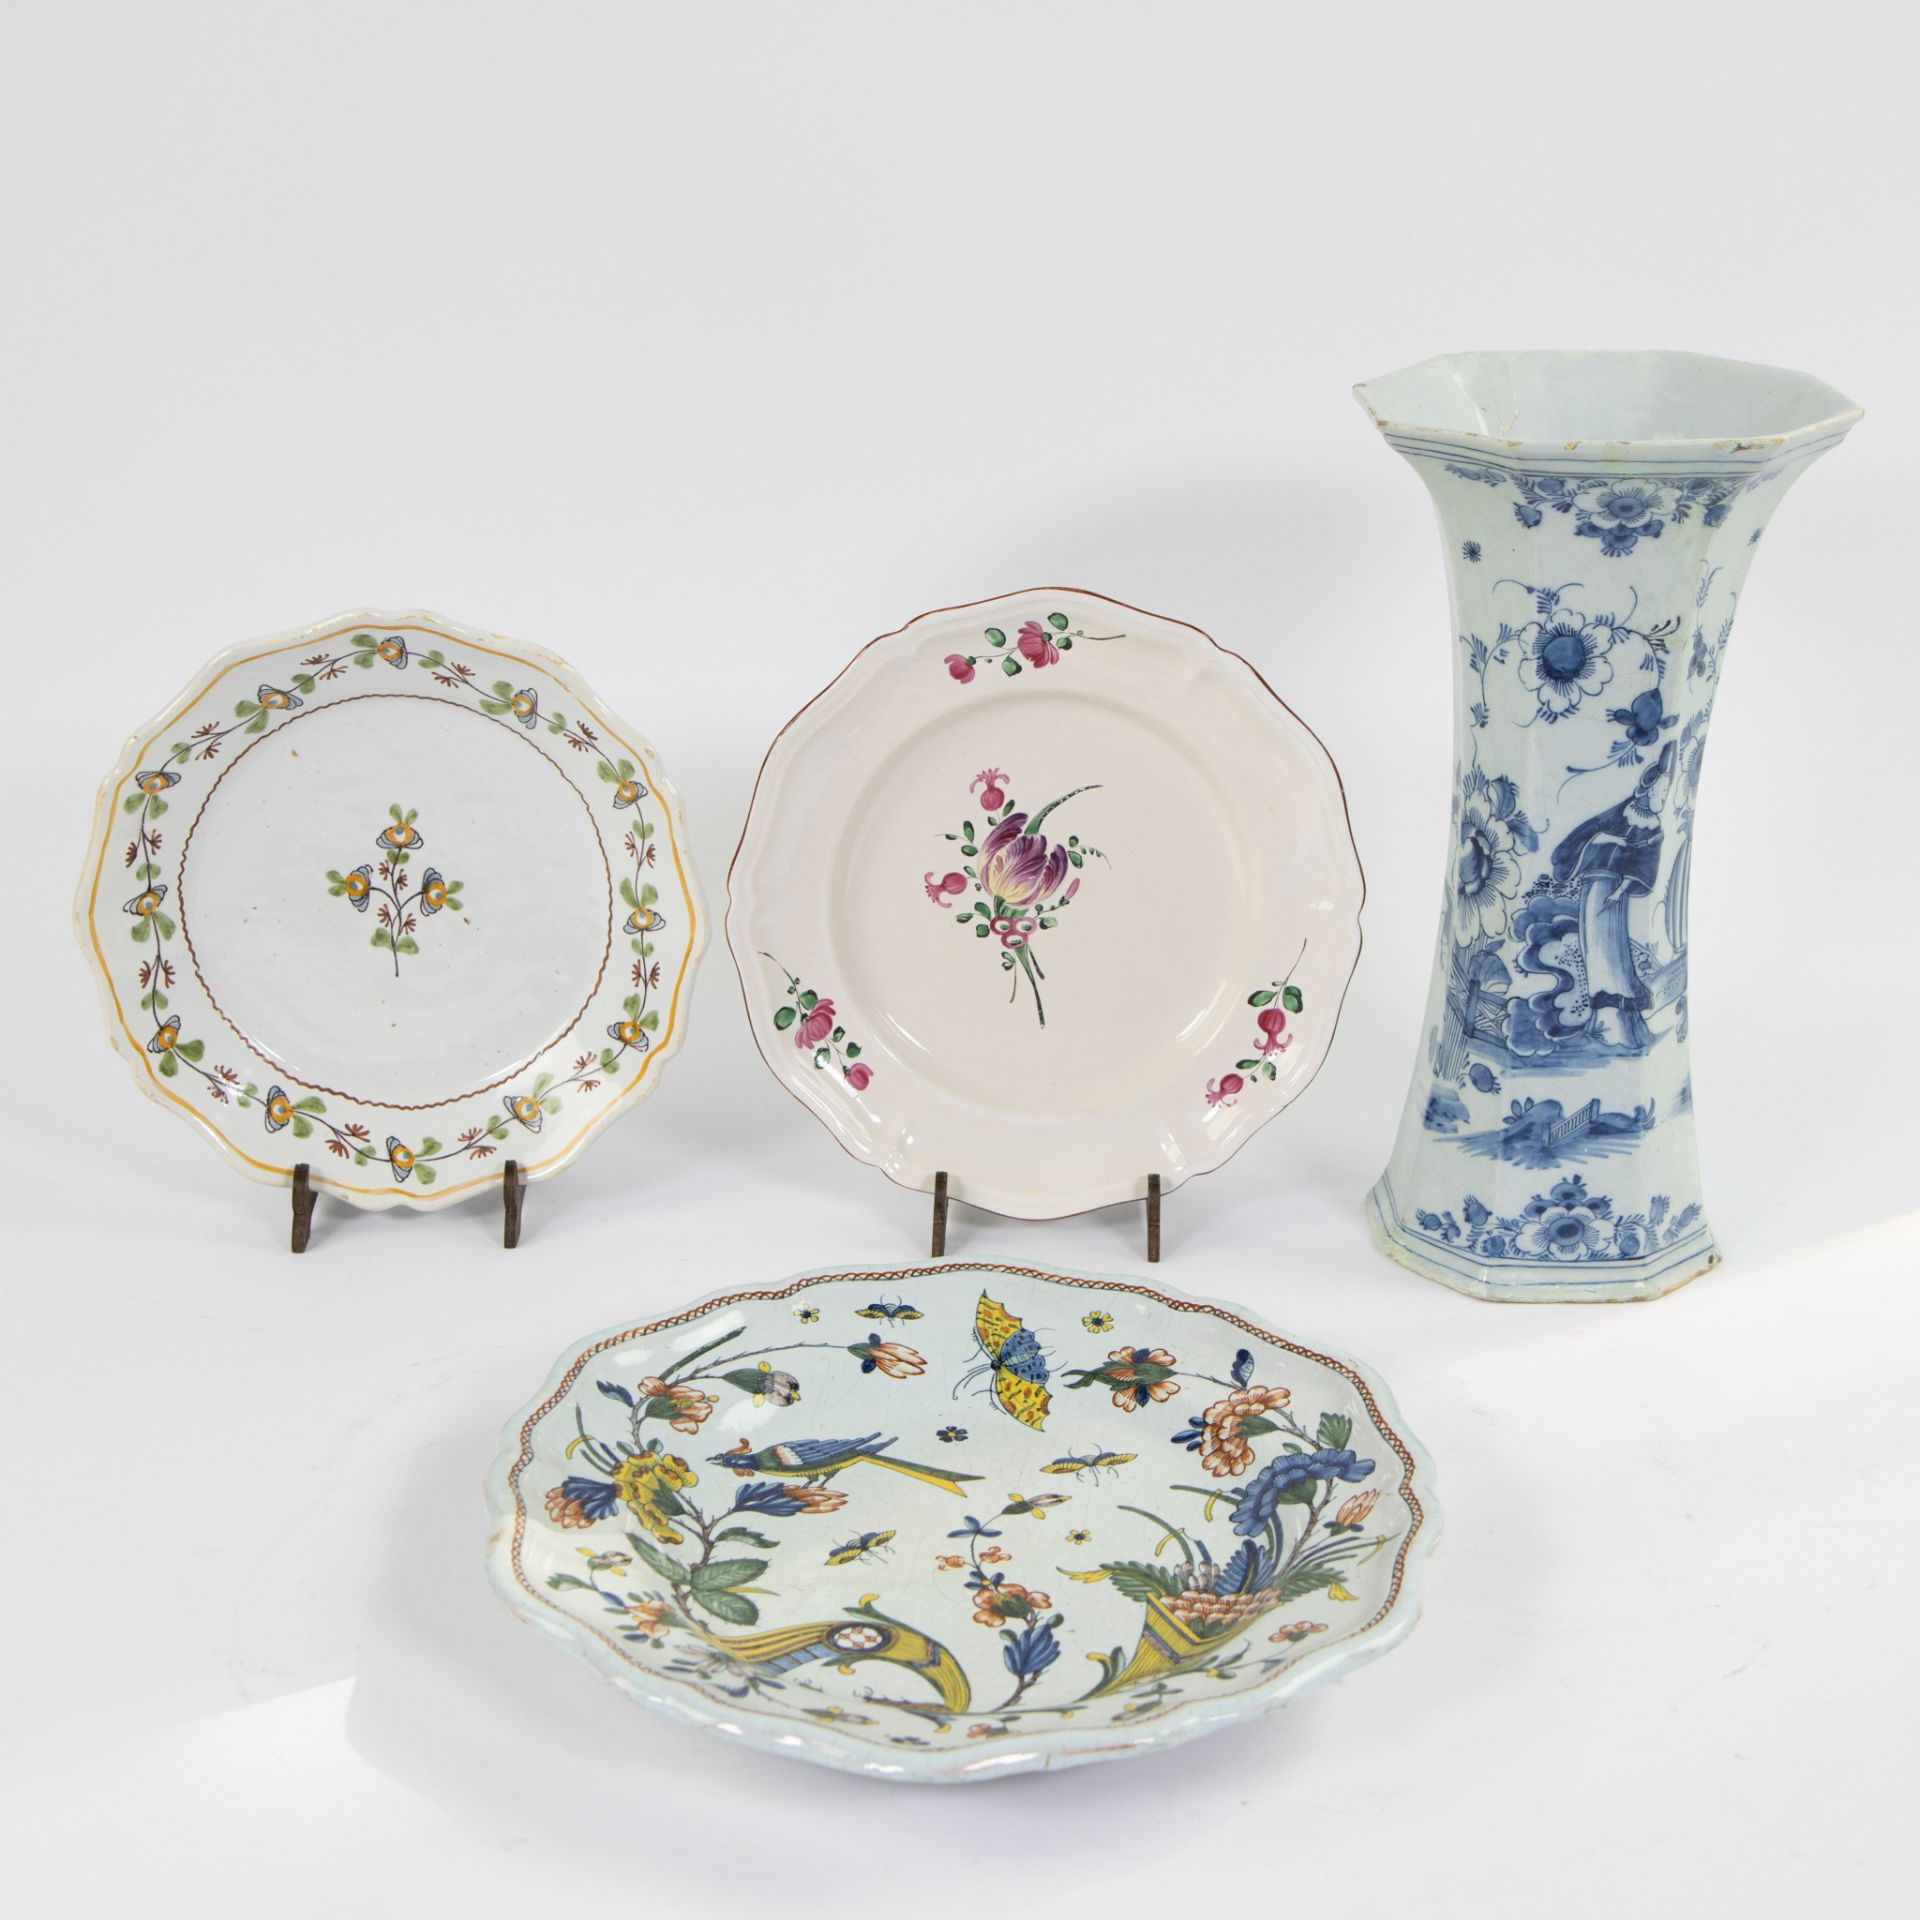 A collection of ceramics French and Delft, vase with chinoiserie